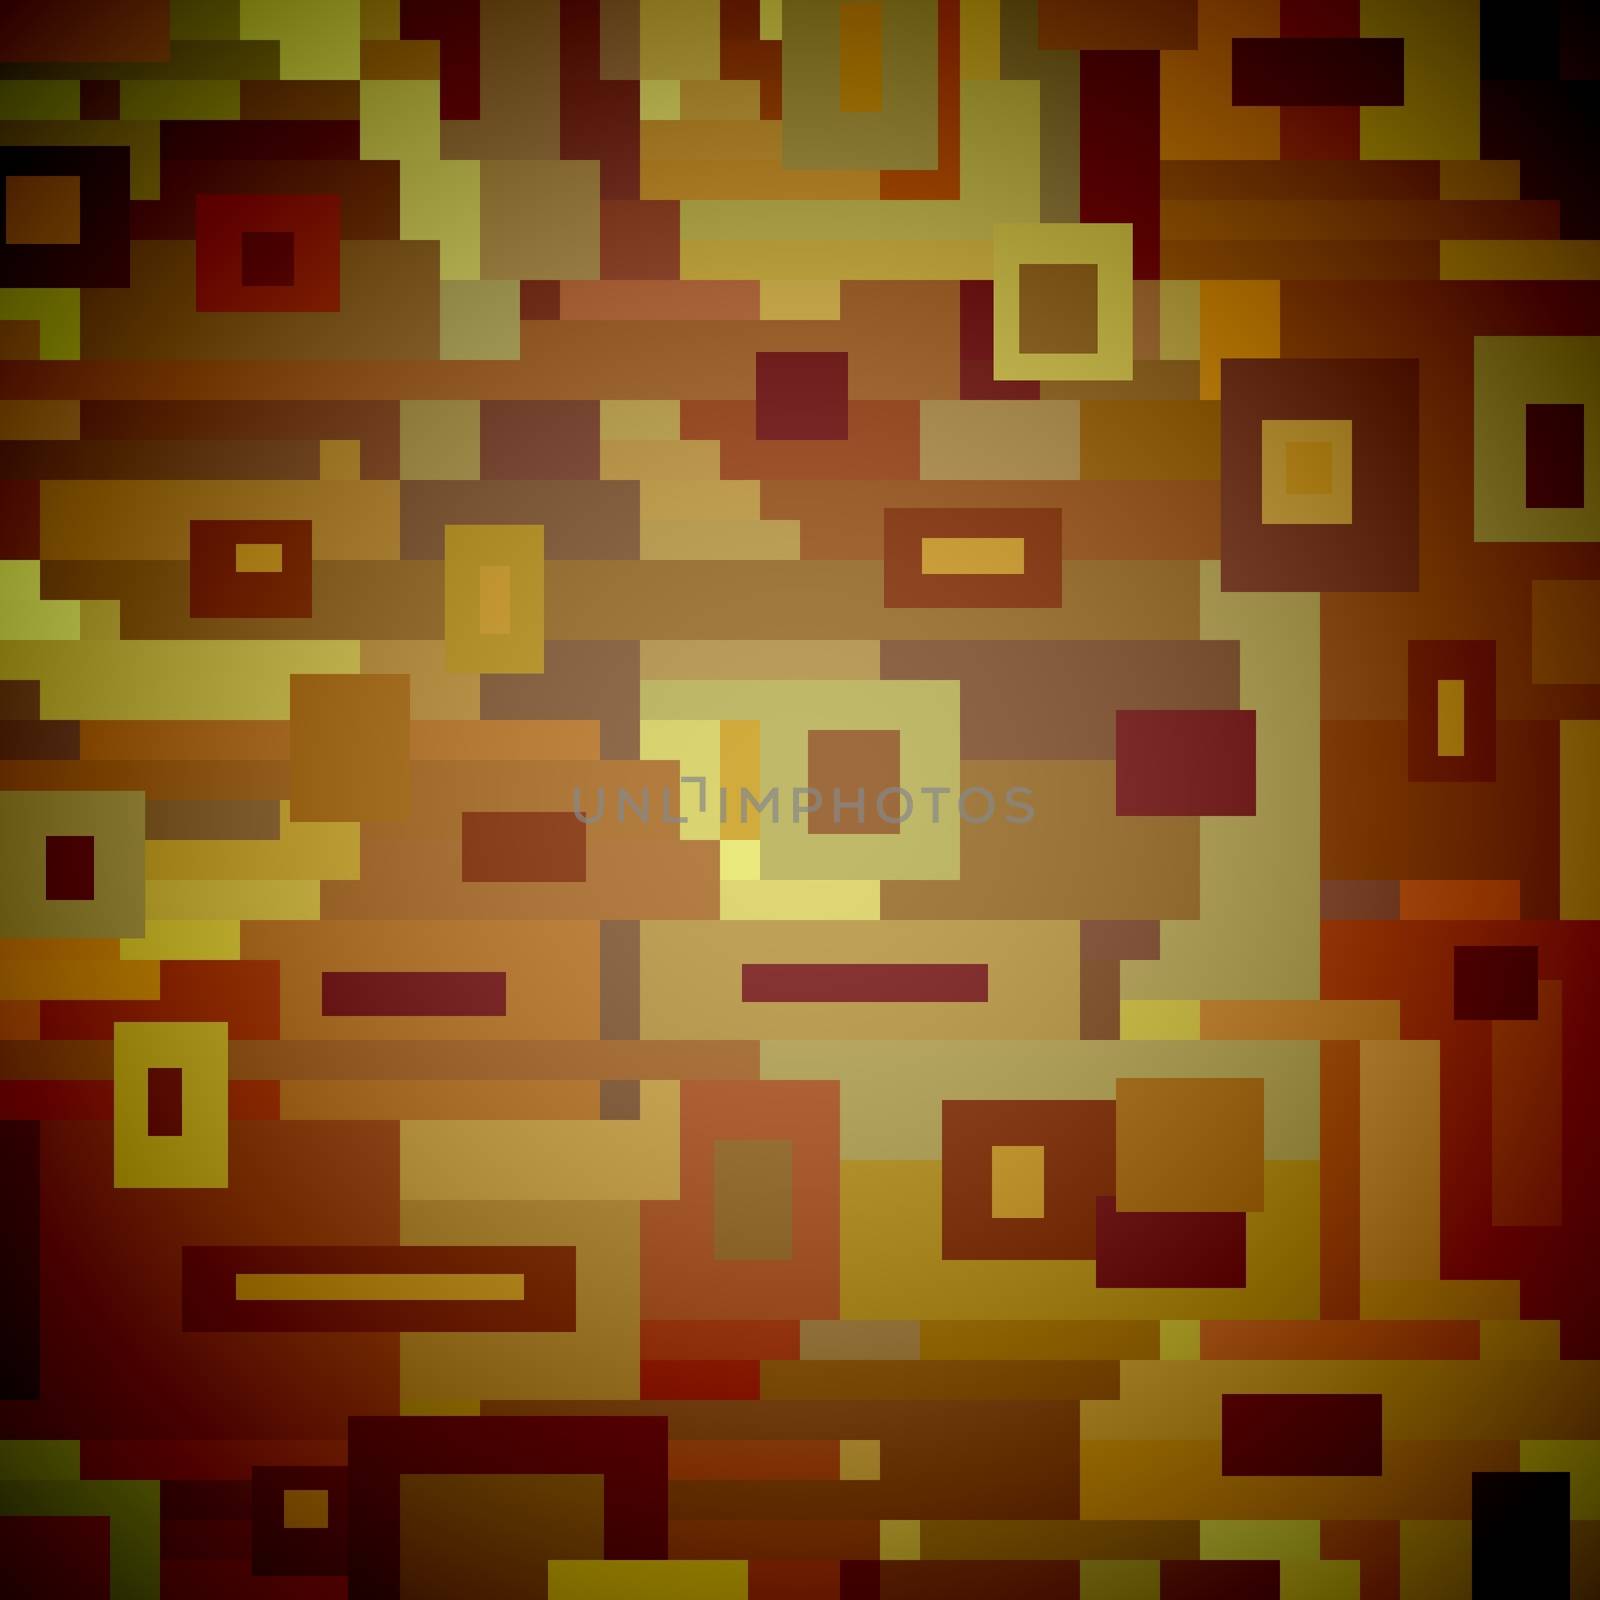 Abstract Illustrated background made of brown pixelated shapes